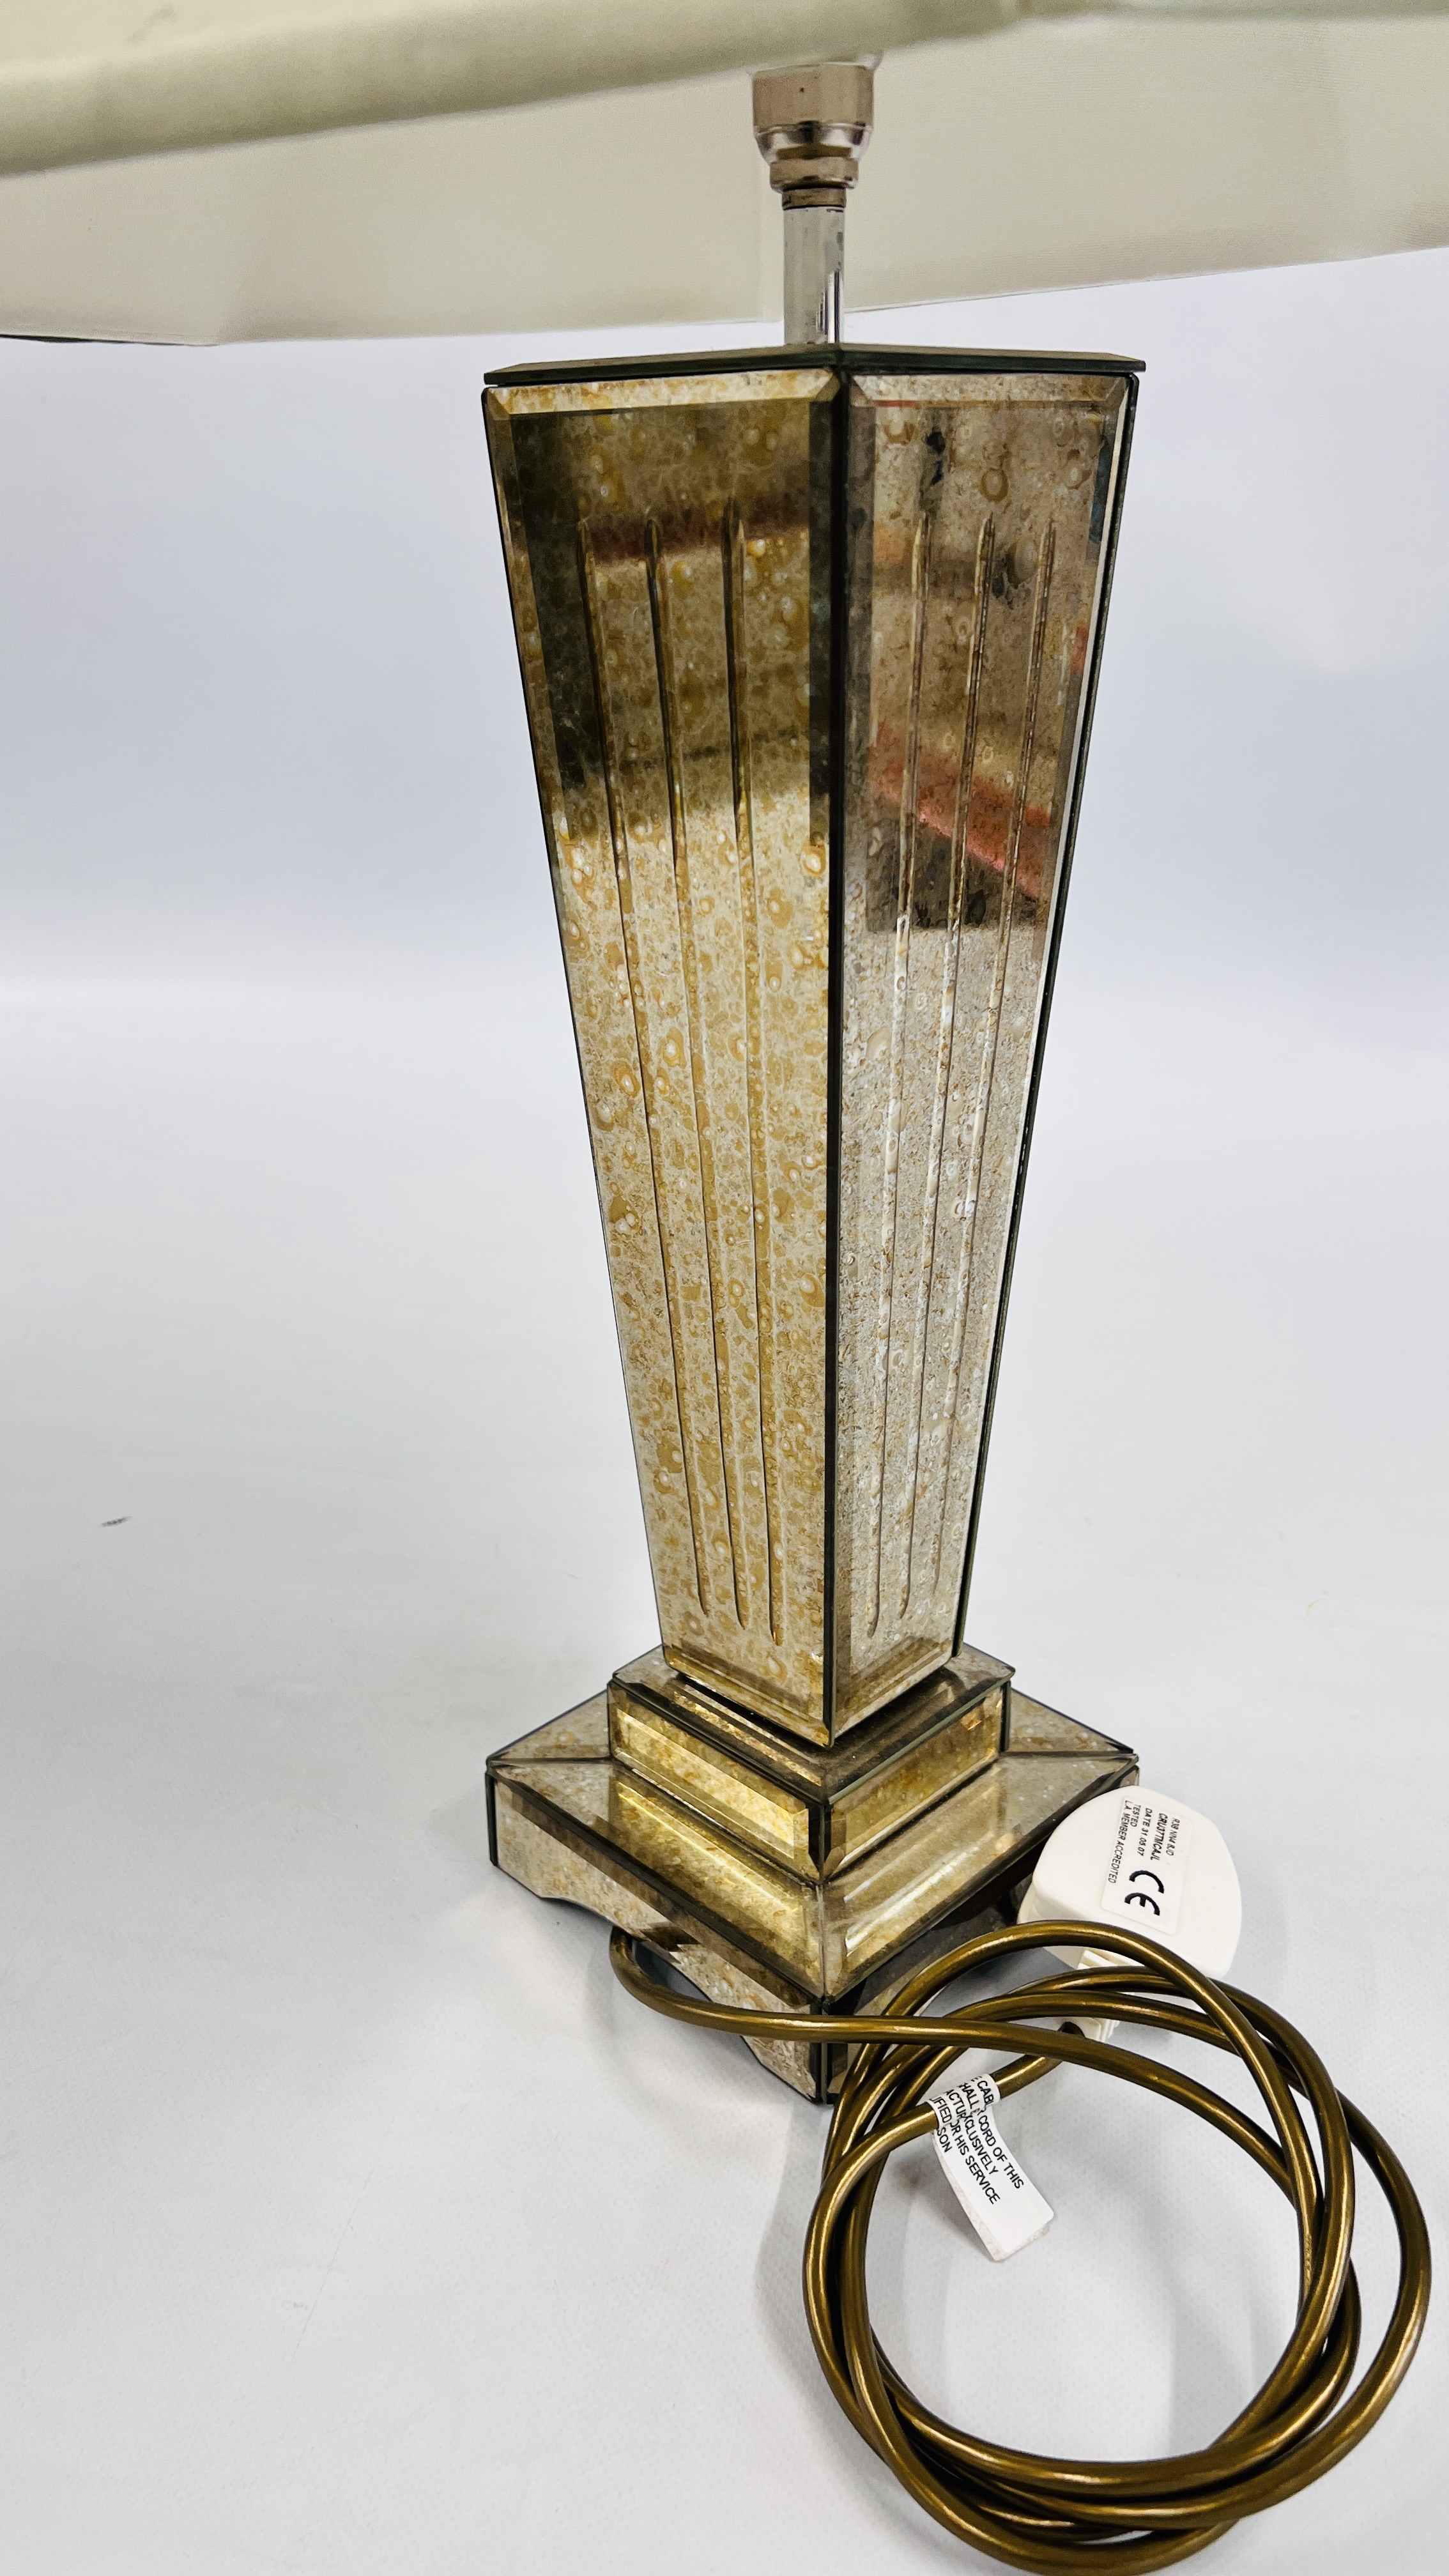 DESIGNER TAPERED MIRRORED BASE TABLE LAMP WITH PLEATED SHADE - SOLD AS SEEN. - Image 3 of 3